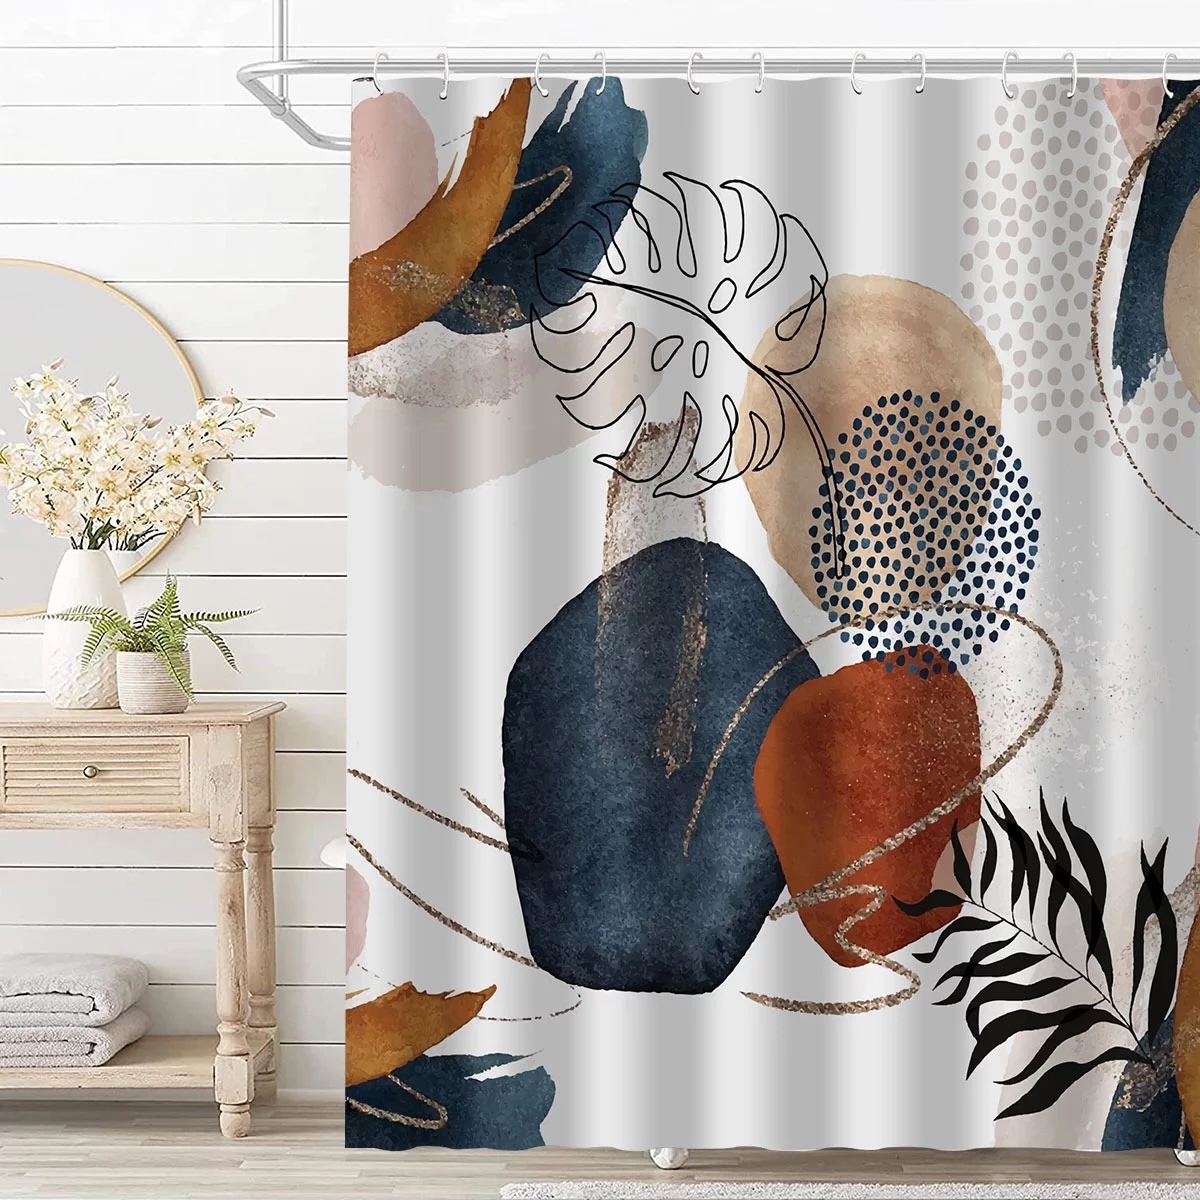 White shower curtain with colorful abstract print